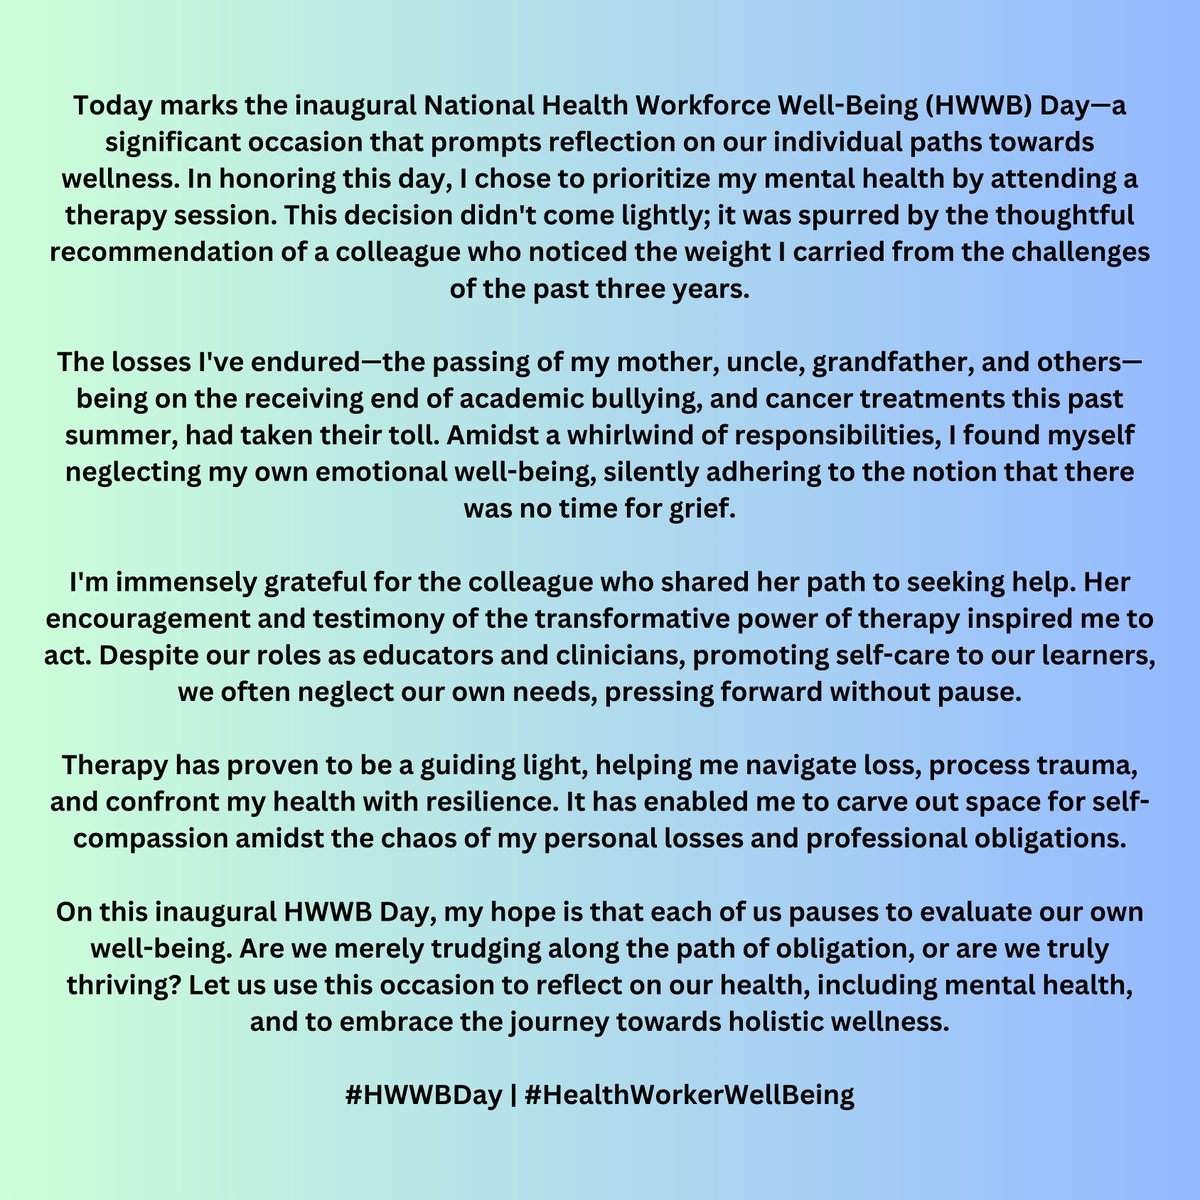 Celebrating #HWWBDay by prioritizing mental health. Therapy isn't just for patients or our students; it's a vital tool for caregivers too. 

Let's pause, reflect, and thrive together. 

🌱 #SelfCare #Wellness #HealthWorkersWellBeing #MedEd #MedTwitter